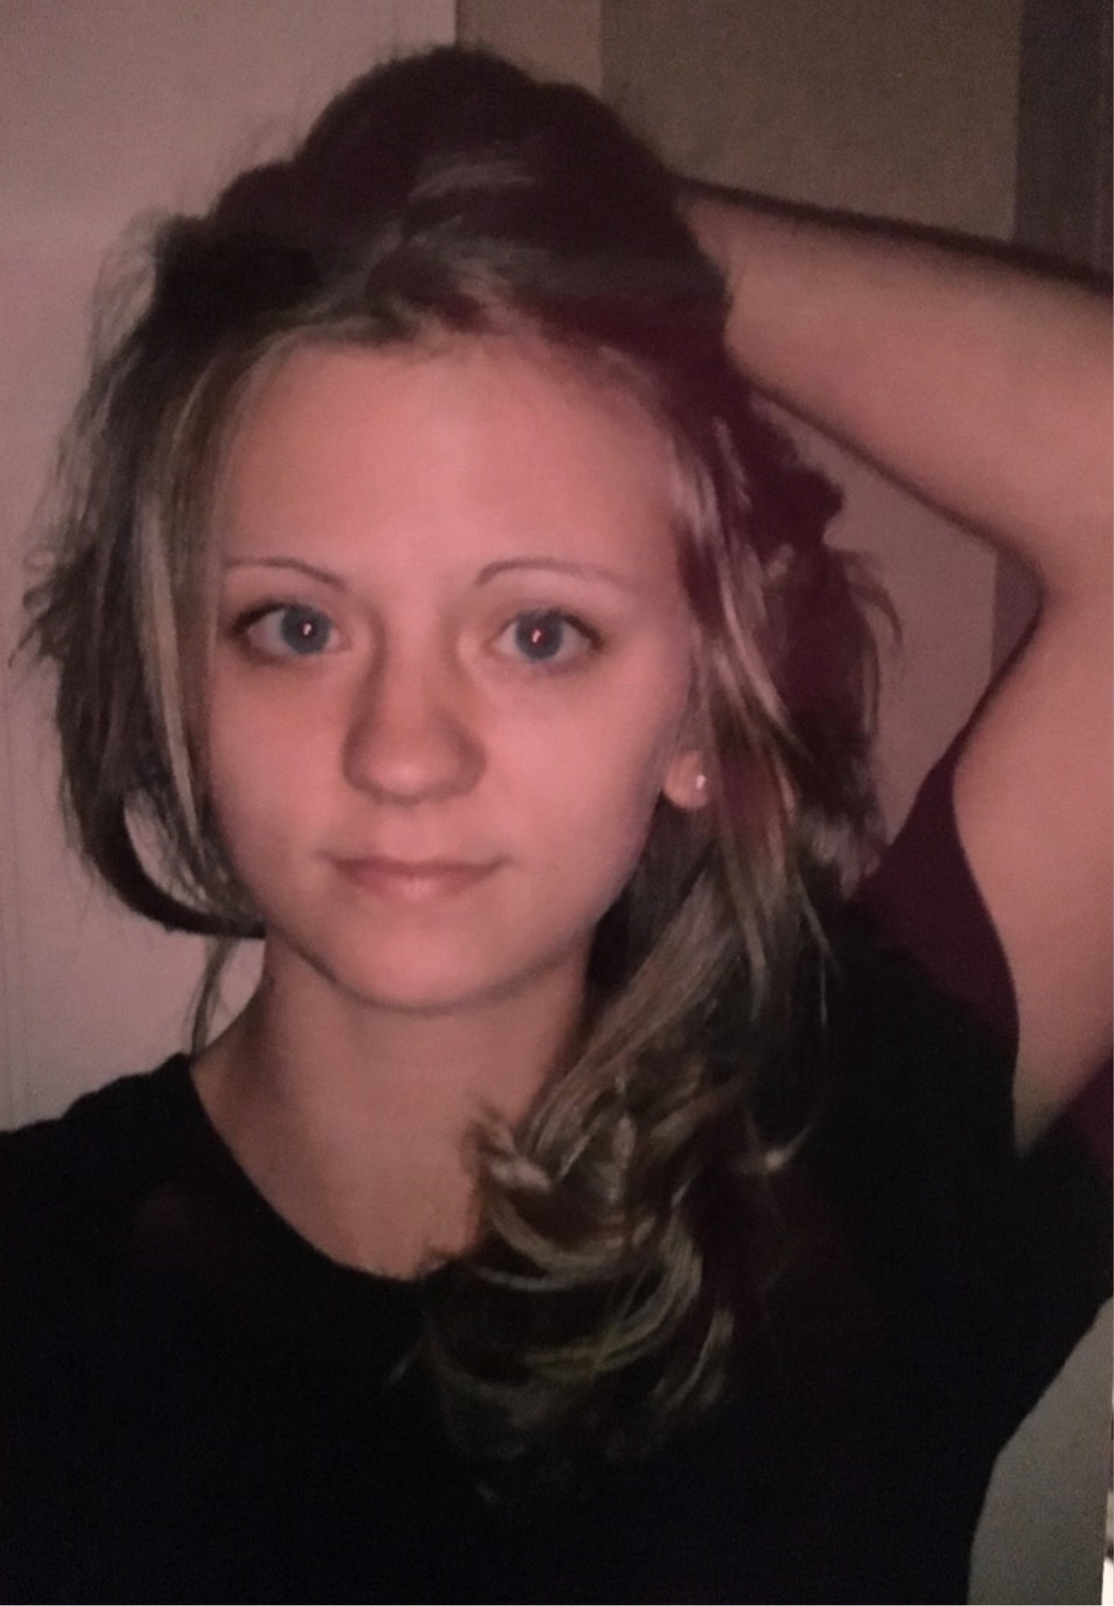 Burned Alive The Unsolved Death Of Jessica Chambers By Rivy Lyon Medium